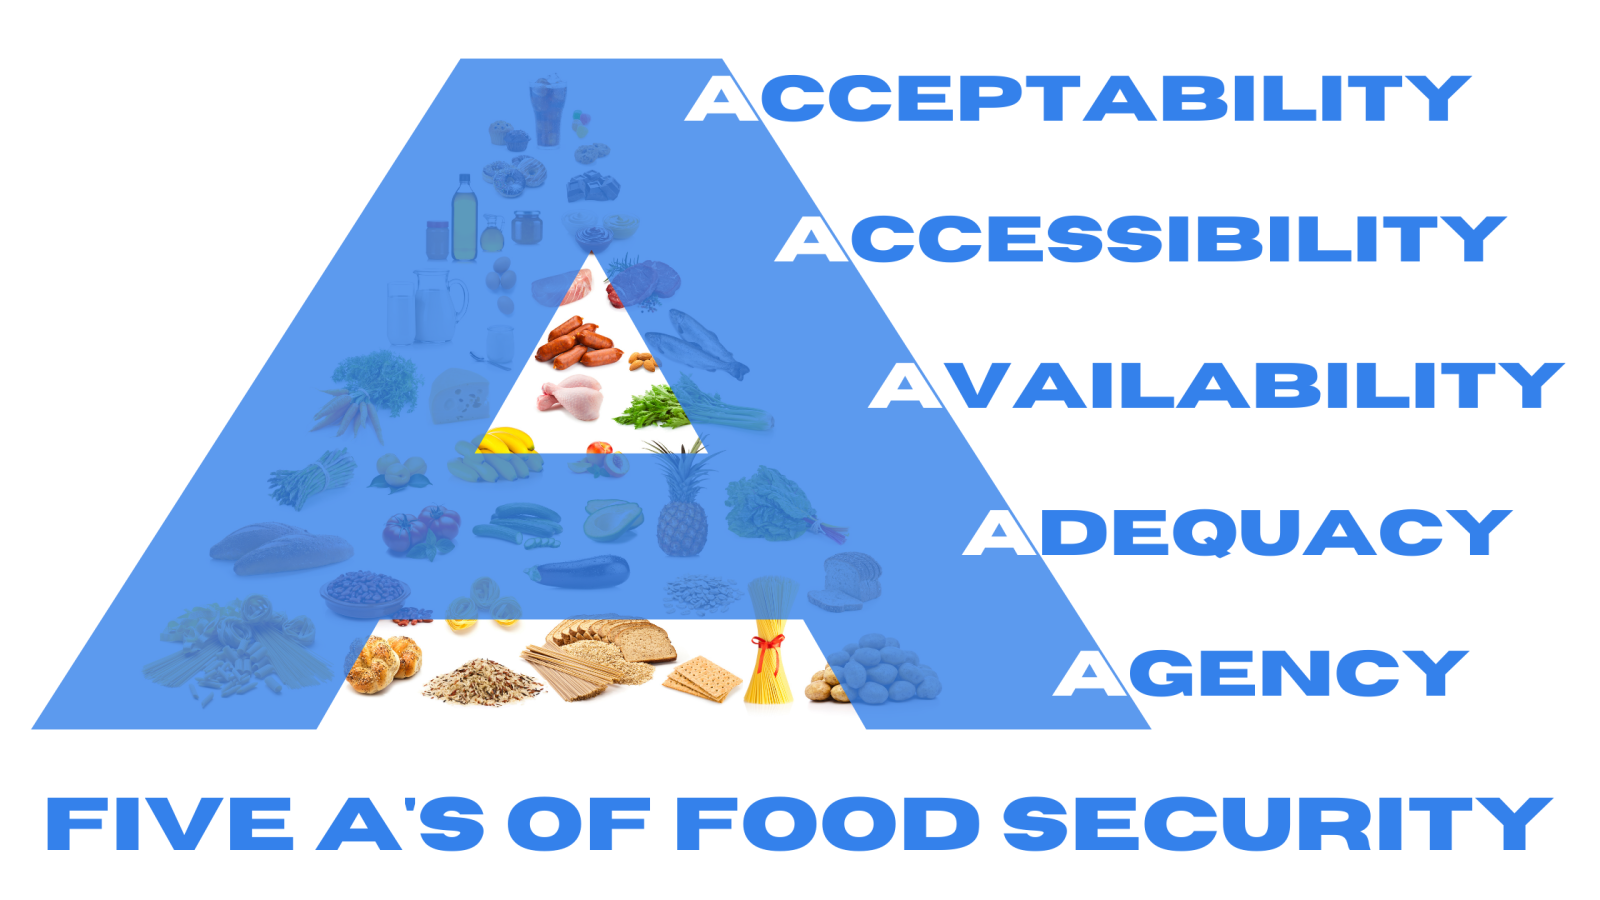 The 5 A's of Food Security Infographic - Florida Freezer